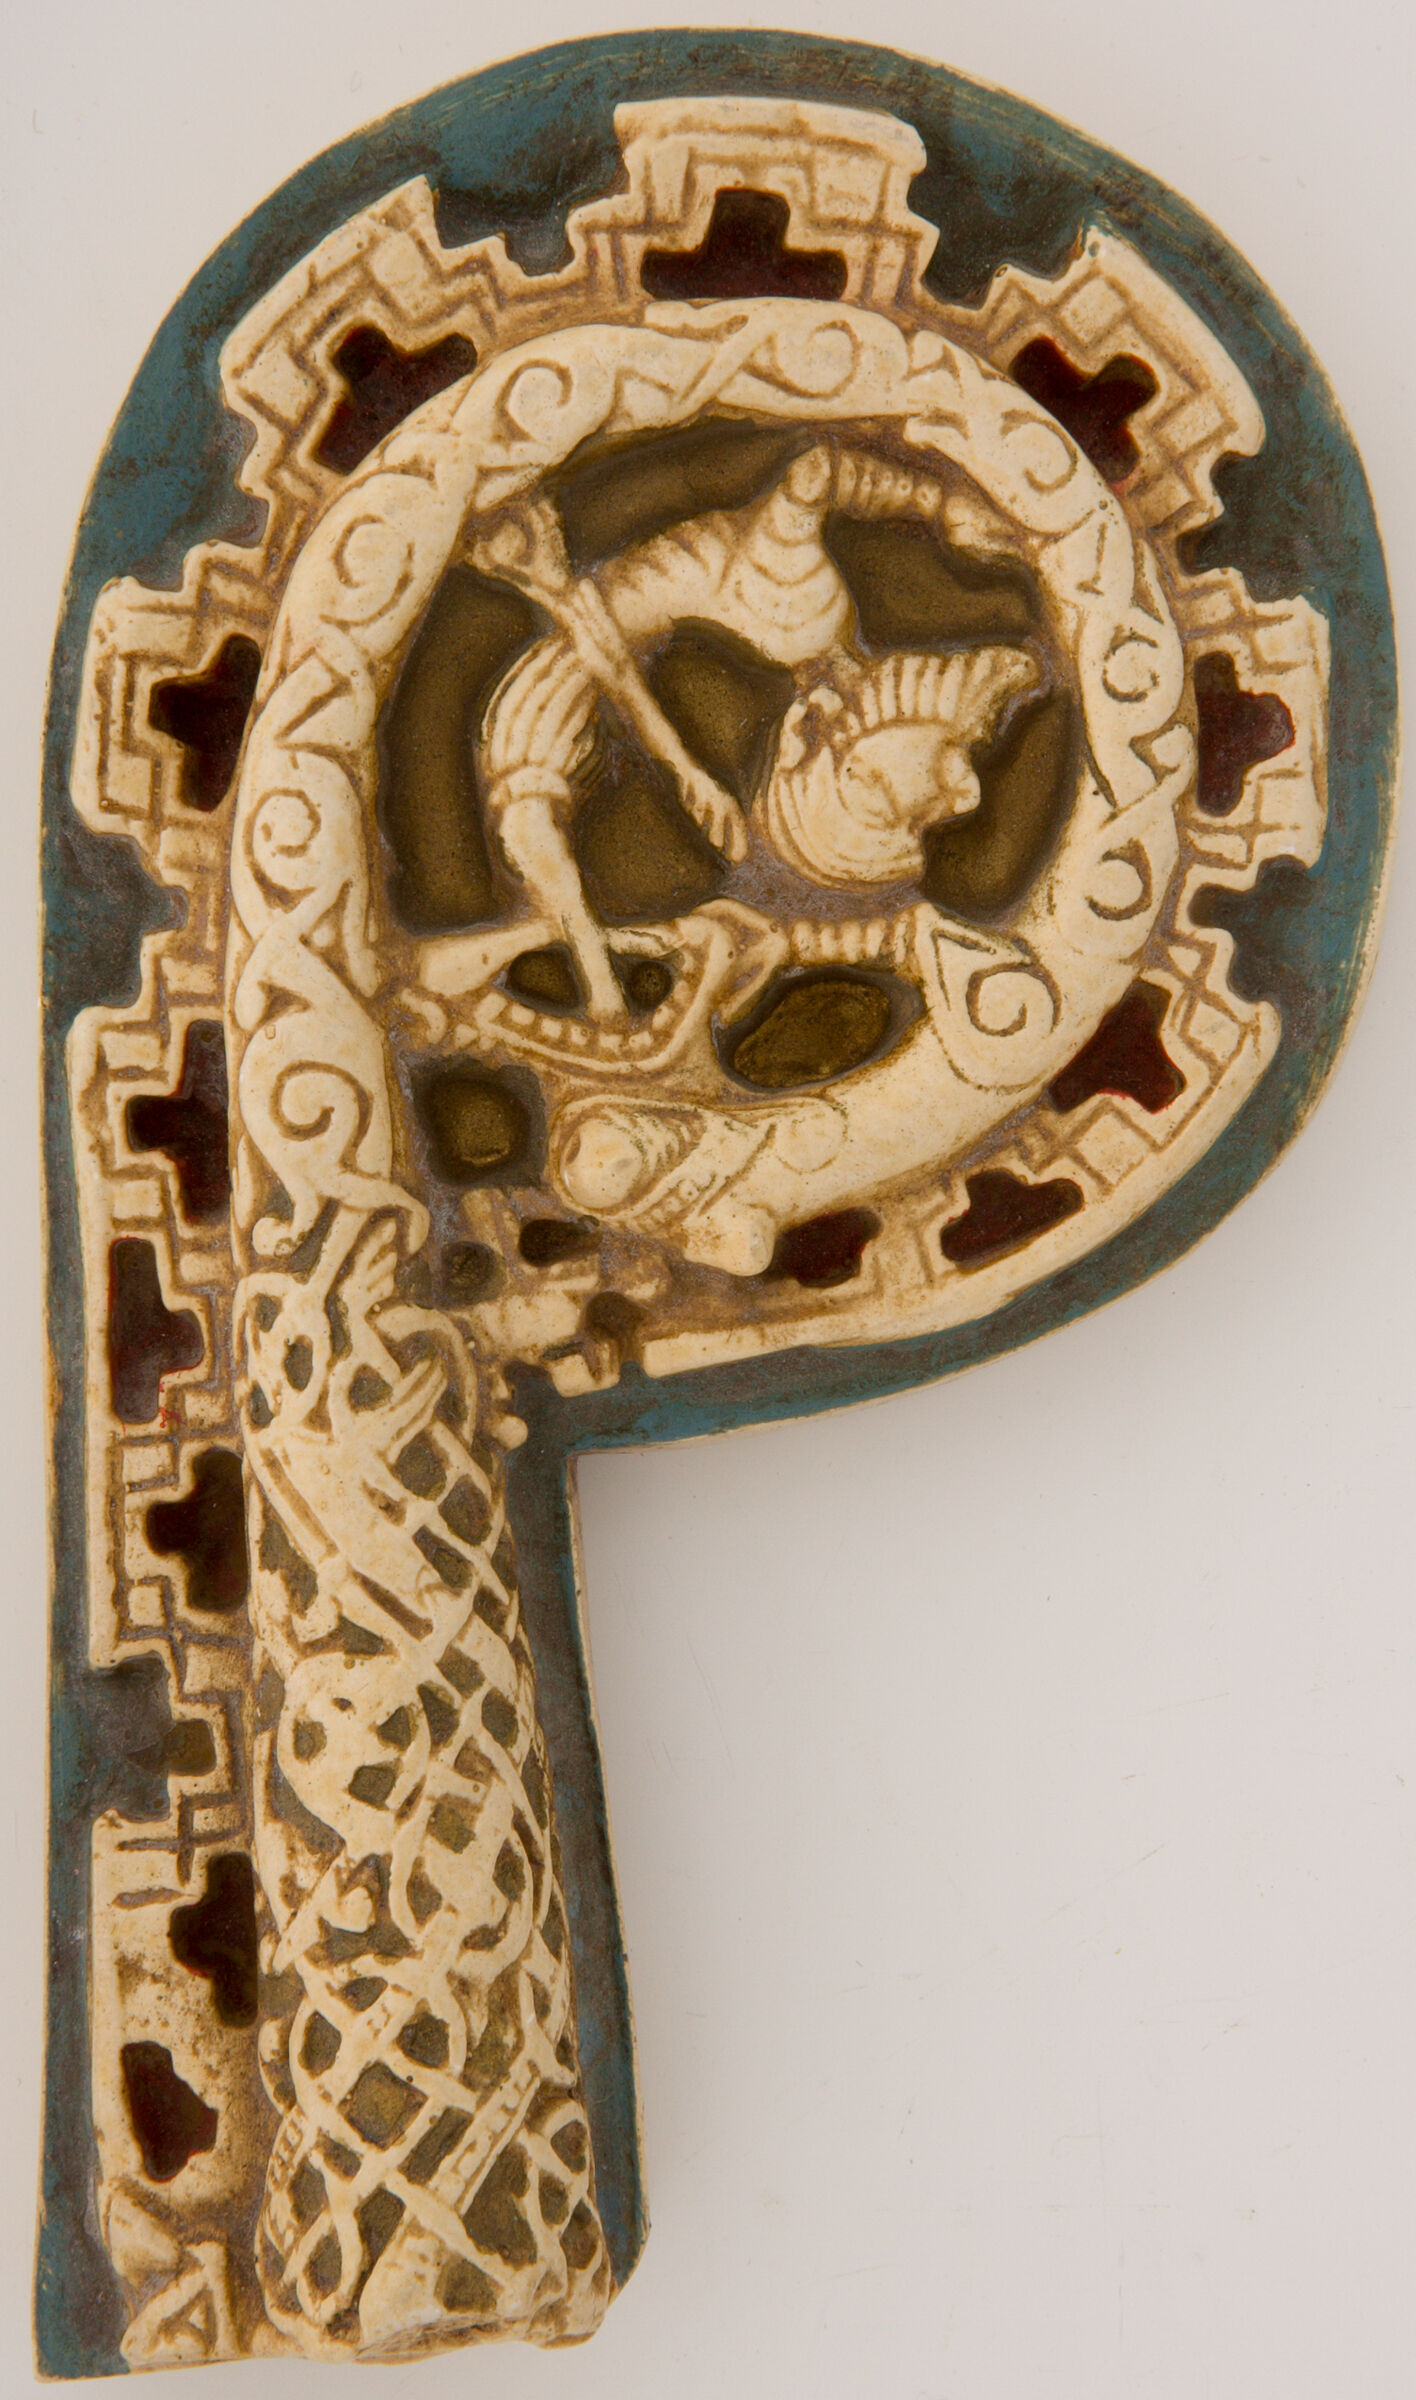 Reproduction Of A 12Th-Century Irish Crozier (